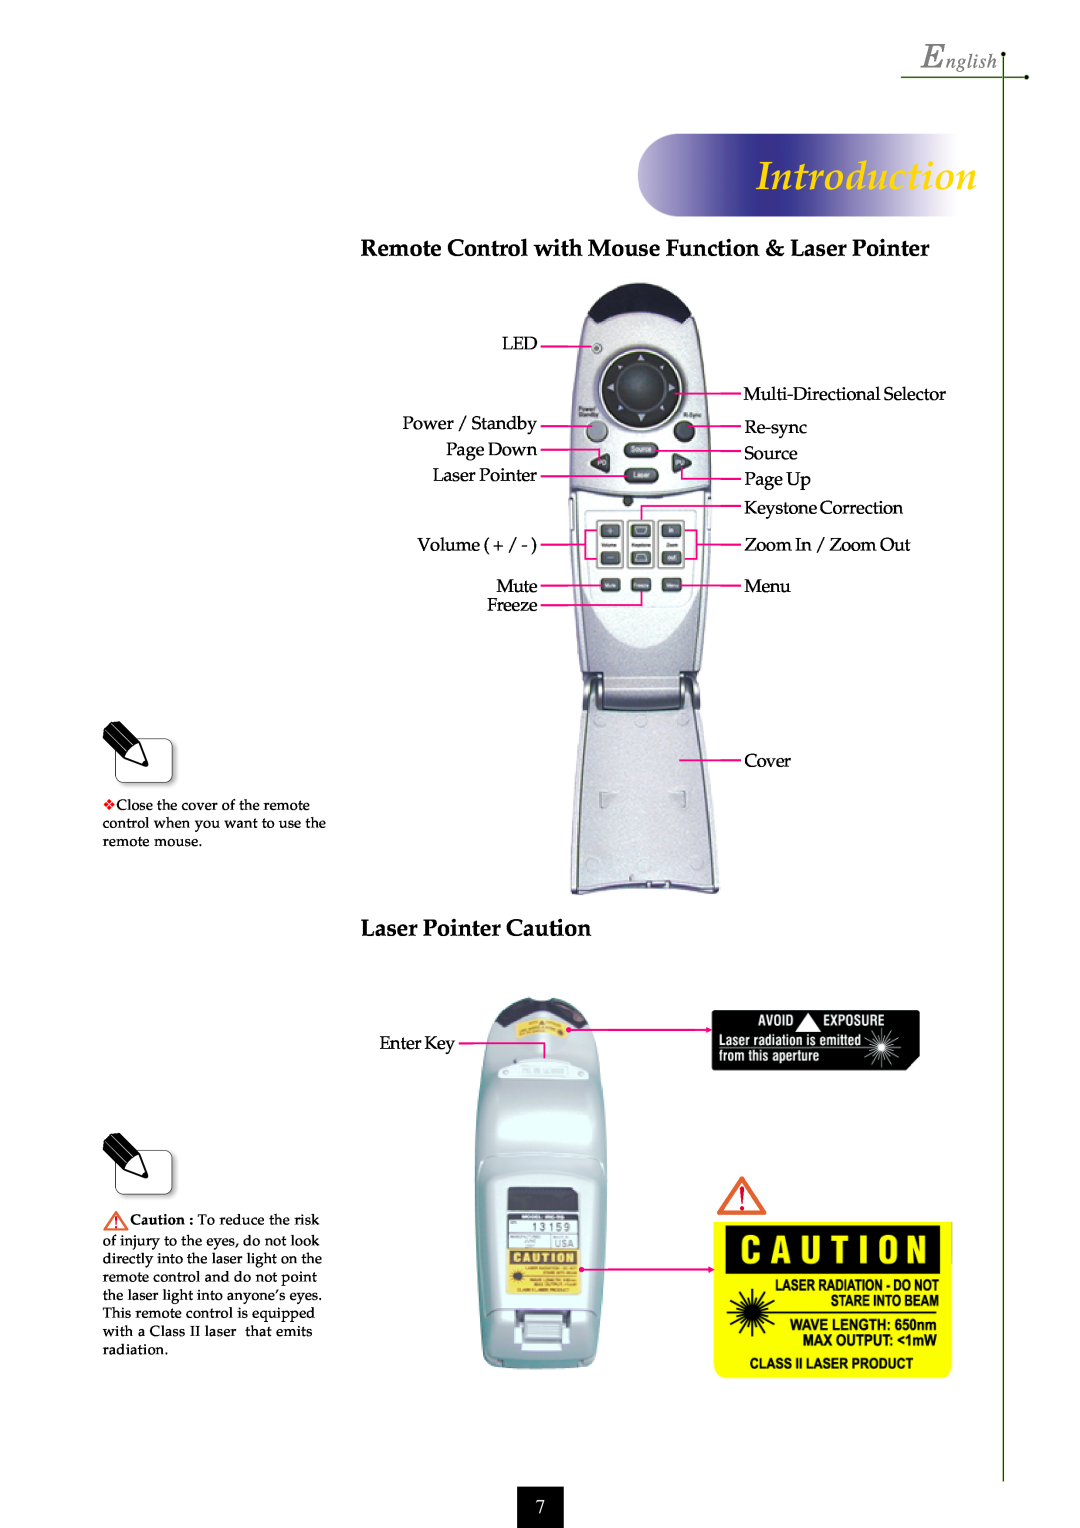 Optoma Technology EP750 Remote Control with Mouse Function & Laser Pointer, Laser Pointer Caution, Introduction, English 